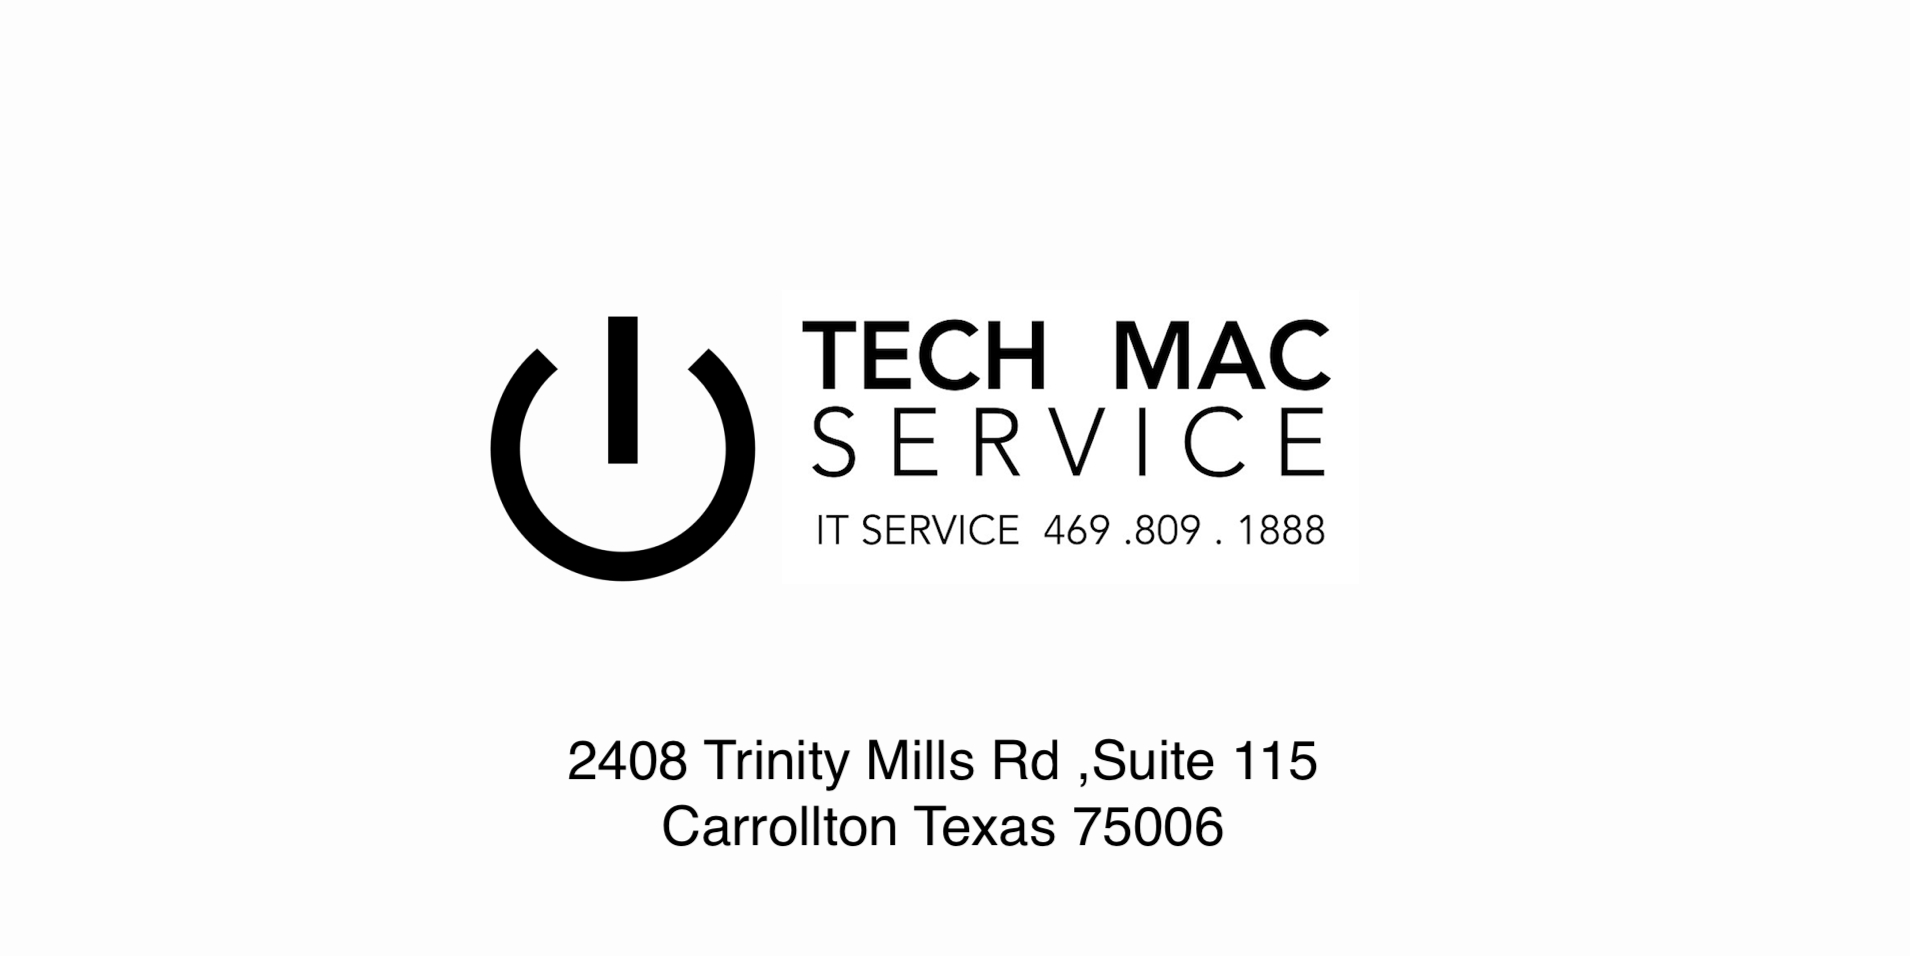 Tech Mac Service Announces Mac and Apple Device Repair for North Dallas and Carrollton Areas of Texas